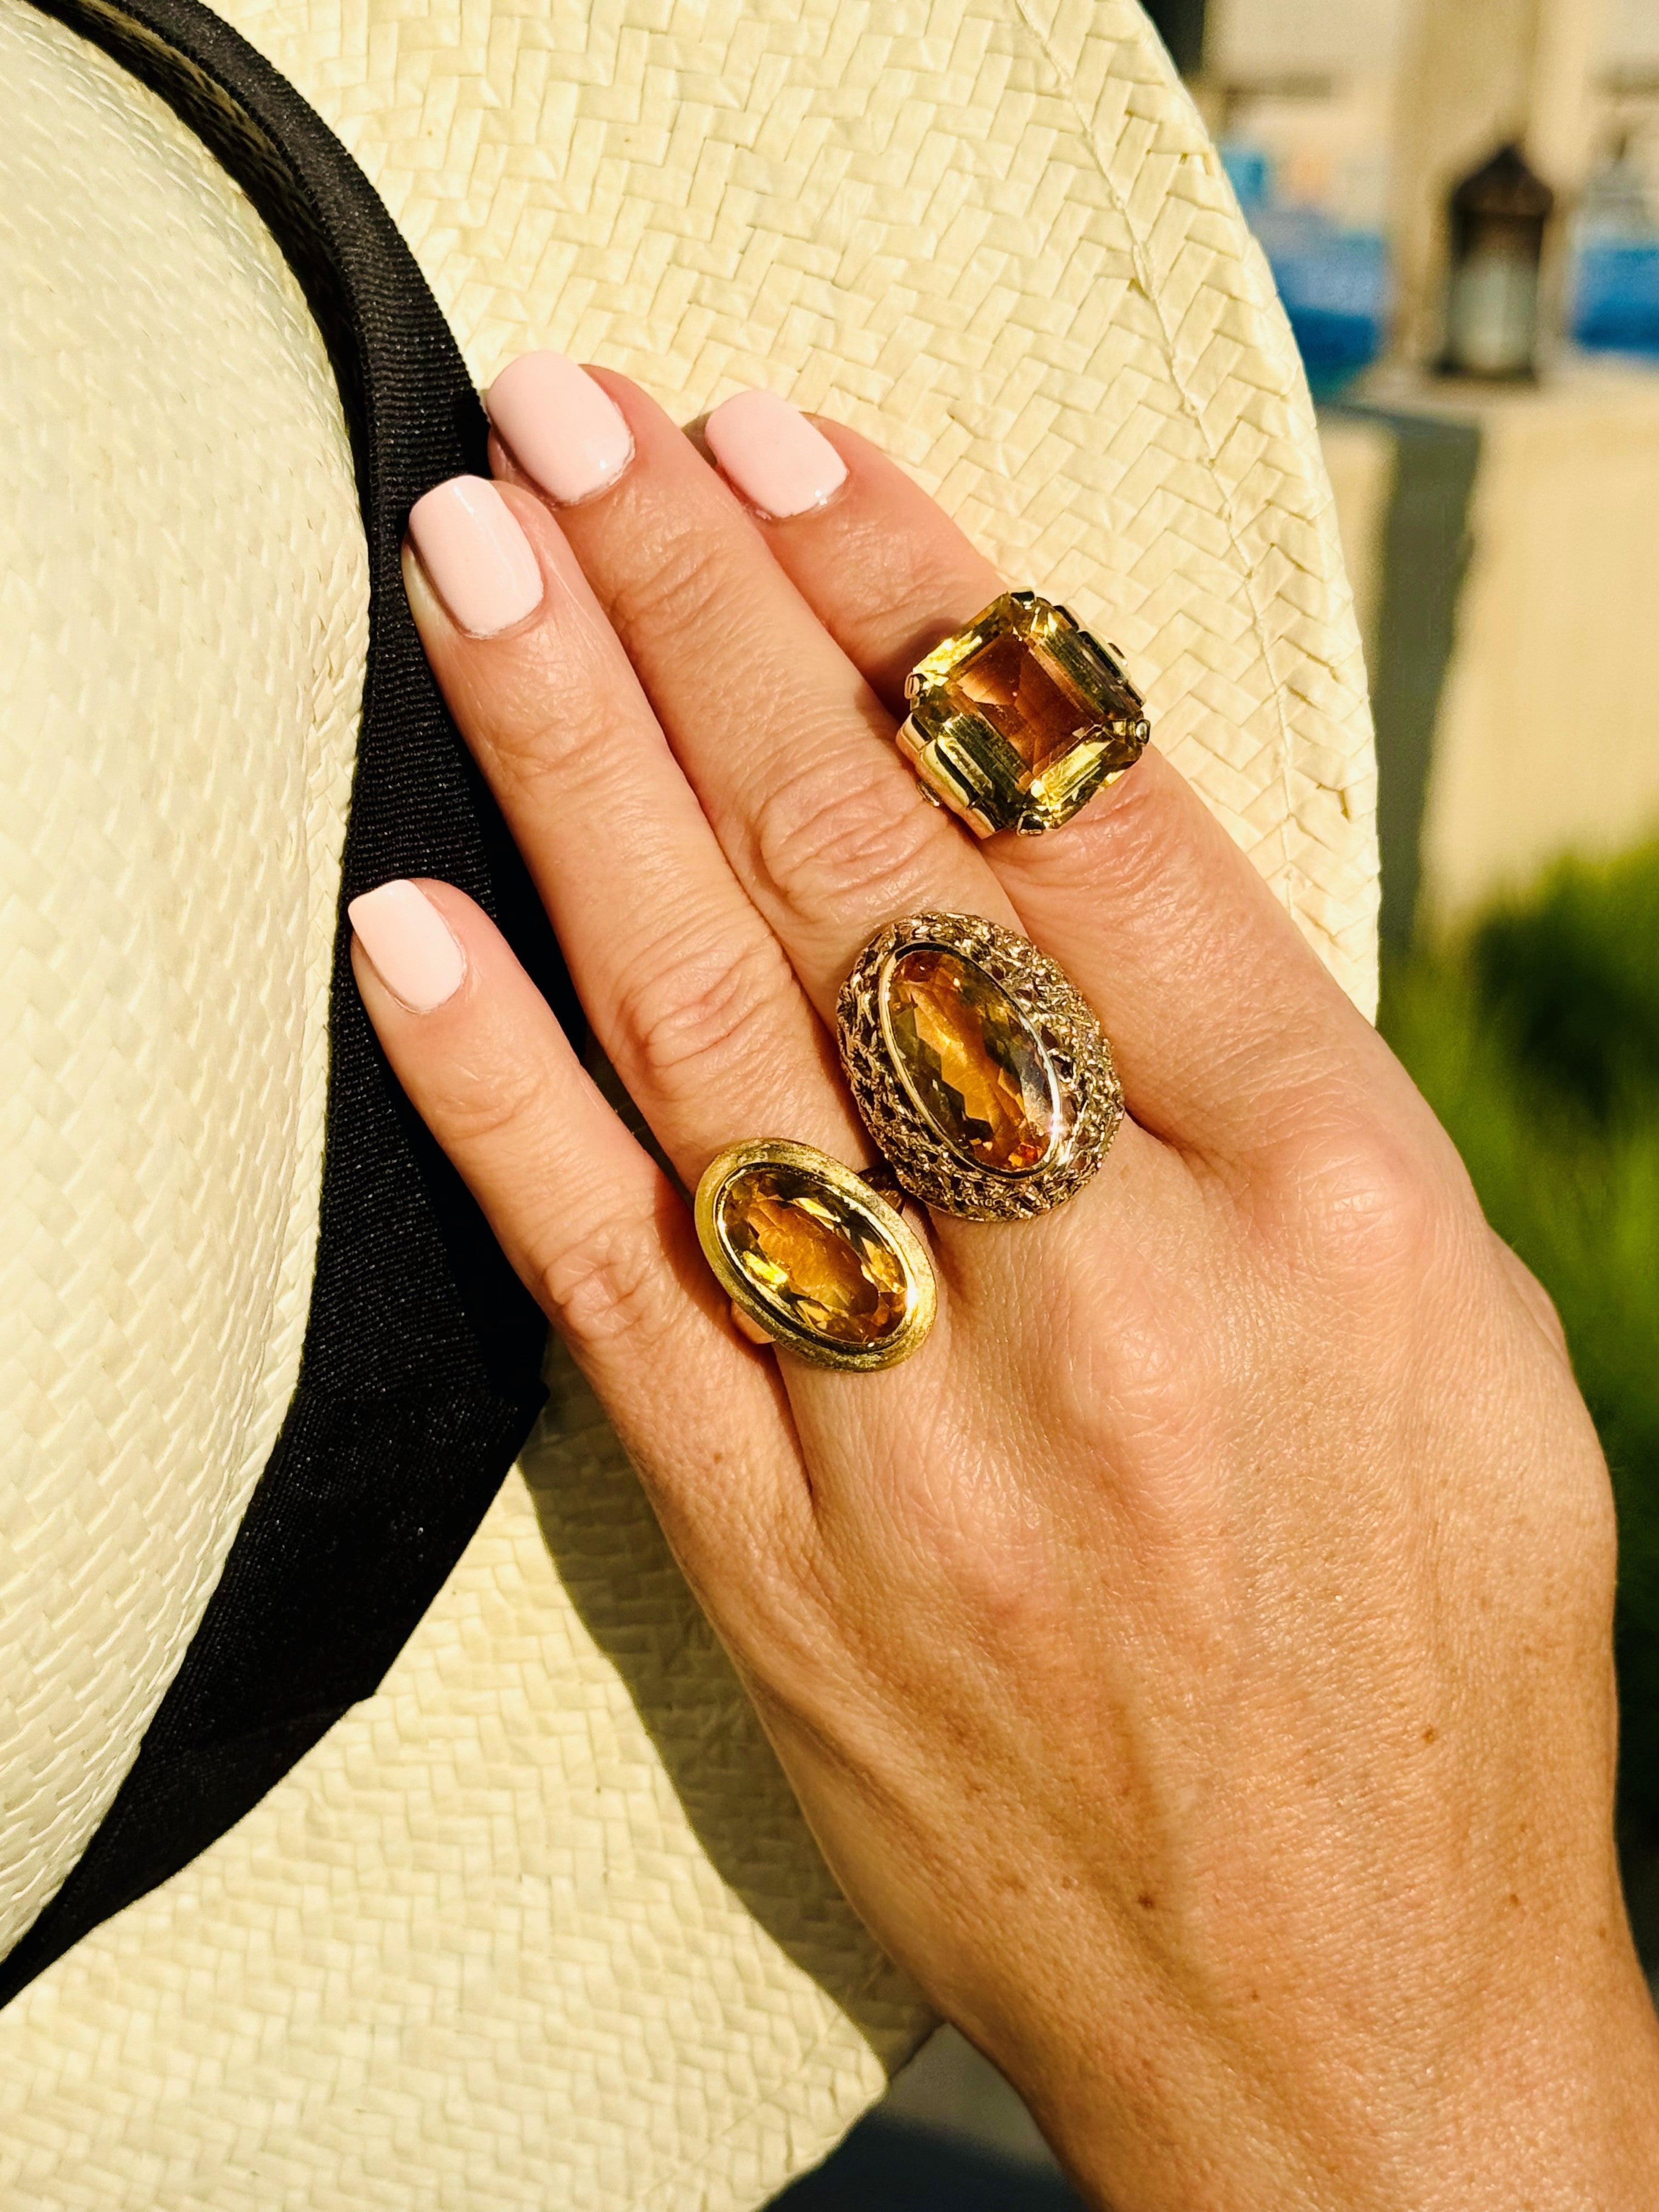 Citrine Honeycomb Colossal Cocktail Ring (7.5carats) 1970s